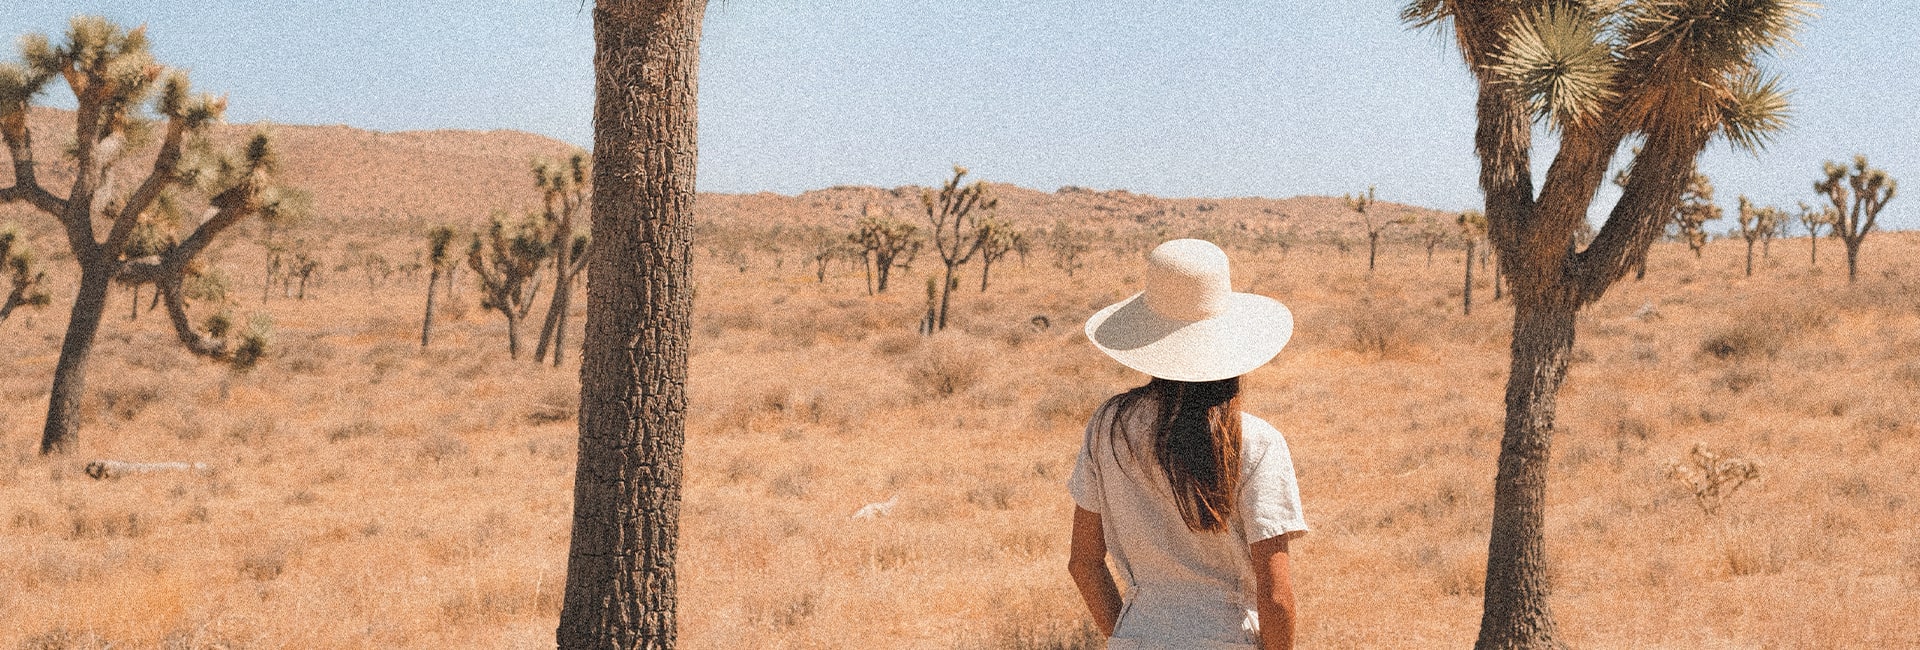 Young woman in a white hat overlooking the landscape in Joshua Tree.